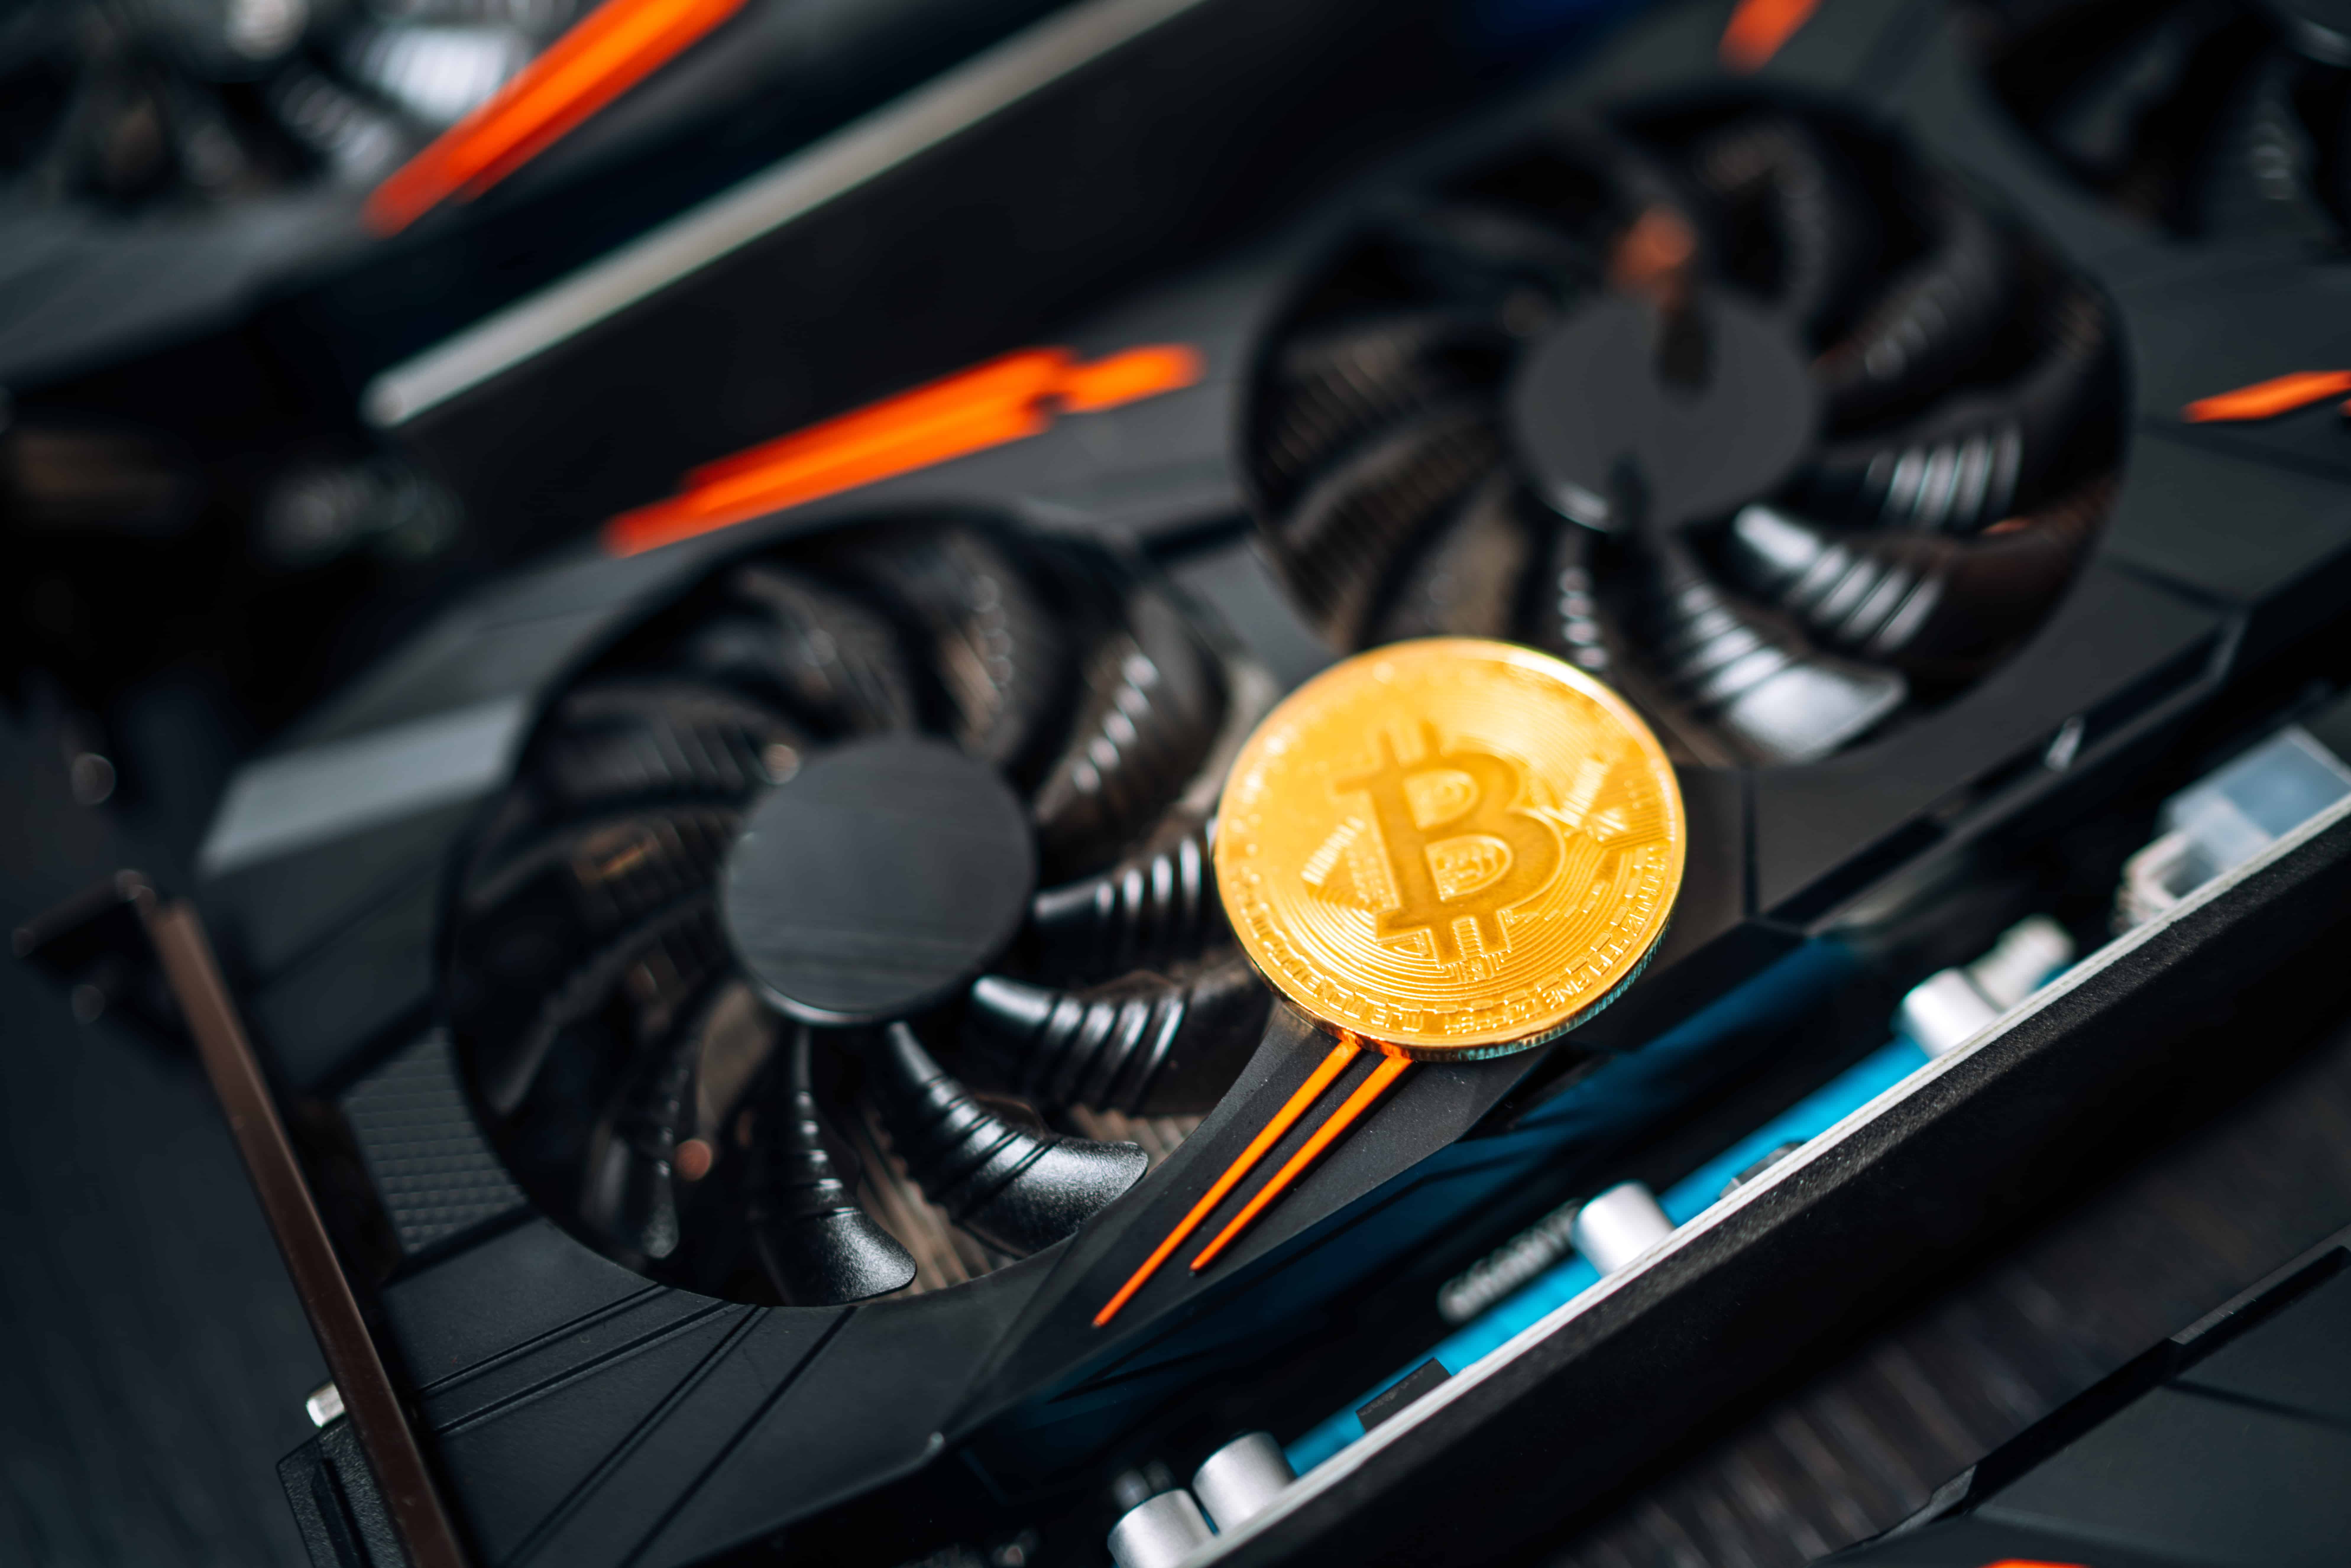 Bitcoin miner, China’s Zhejiang province busts dozens of state-owned entities for mining crypto